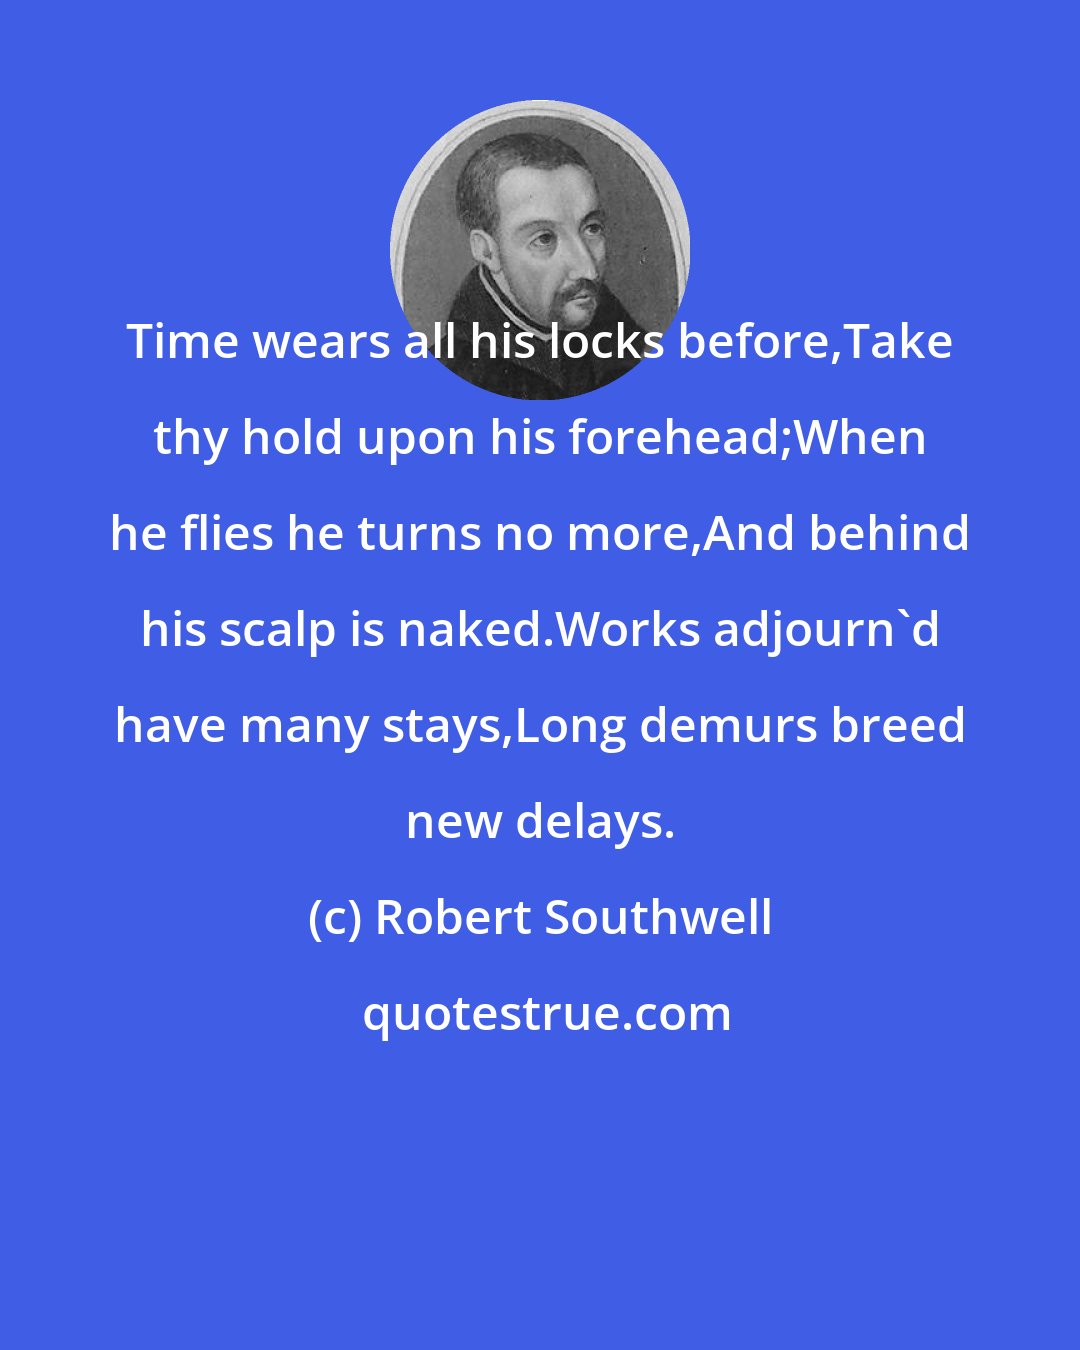 Robert Southwell: Time wears all his locks before,Take thy hold upon his forehead;When he flies he turns no more,And behind his scalp is naked.Works adjourn'd have many stays,Long demurs breed new delays.